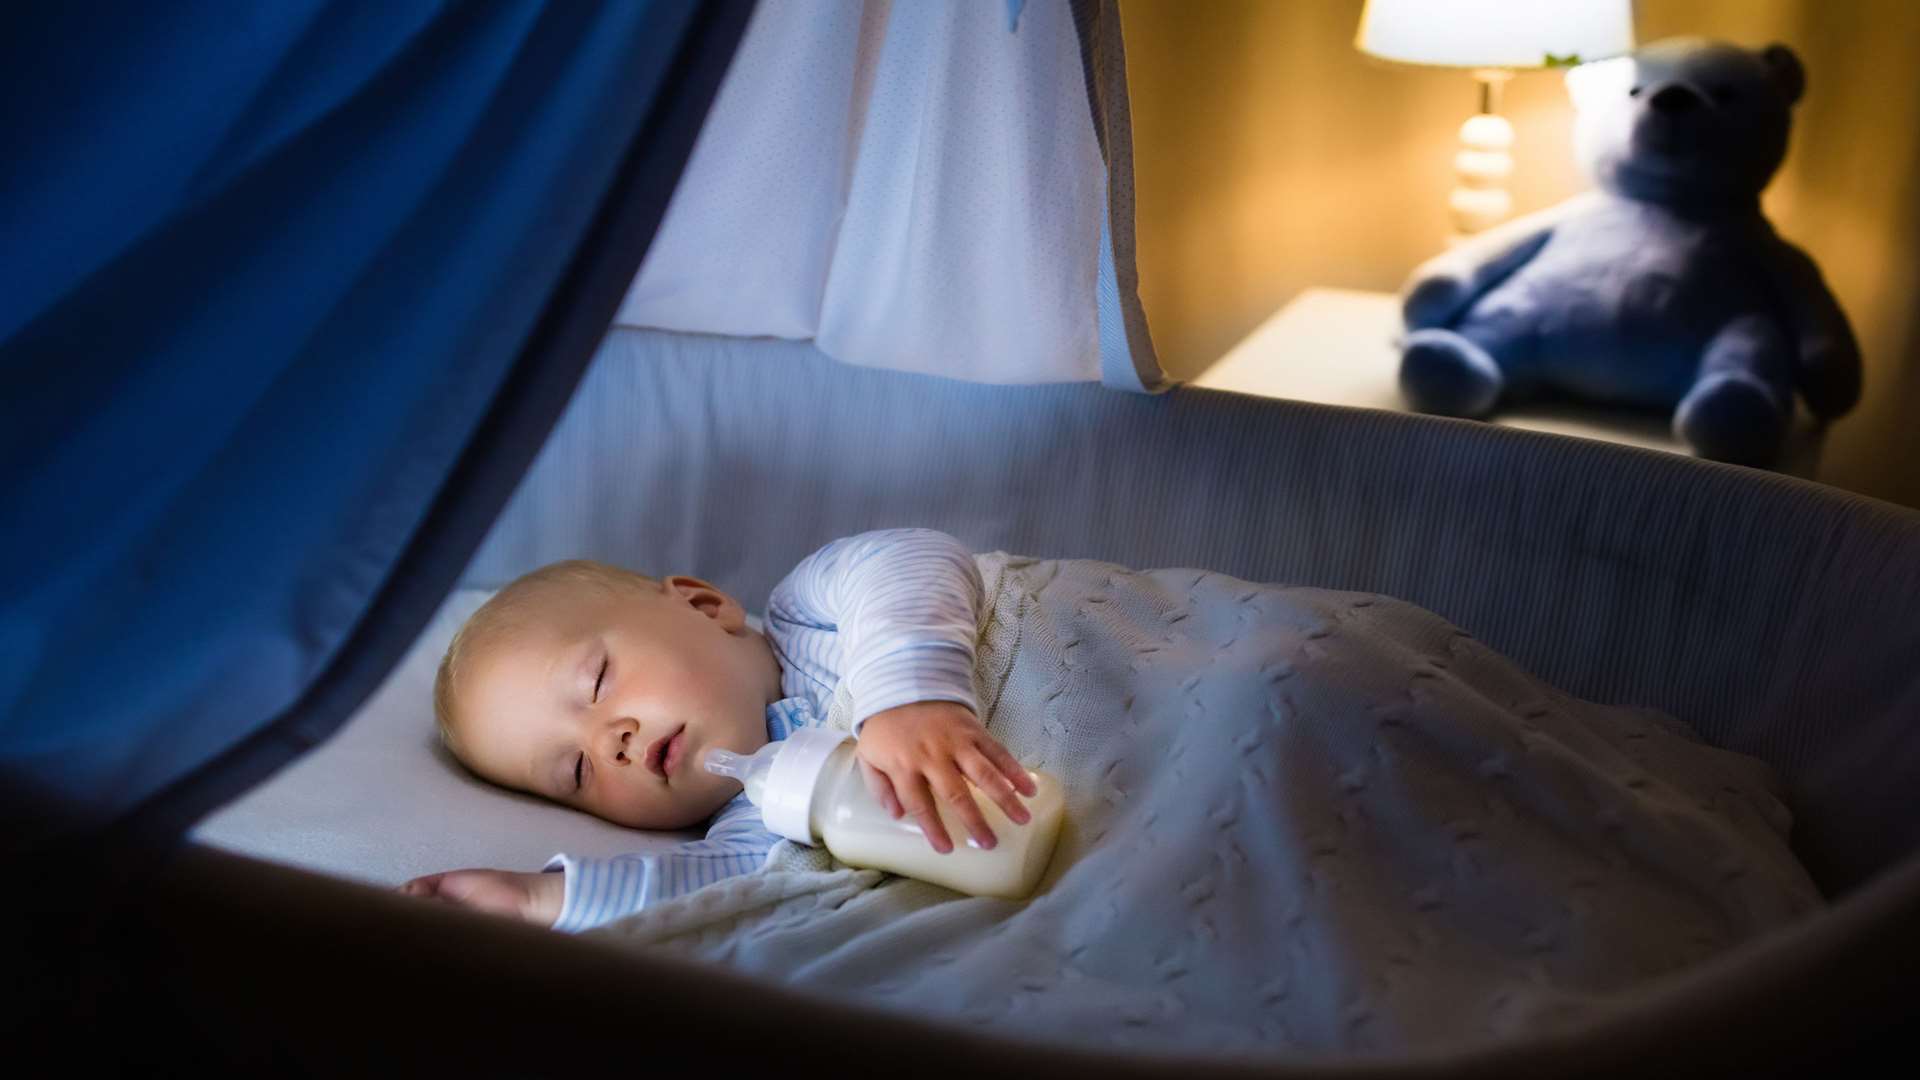 Parents are being encouraged to understand more about putting their babies to bed safely.